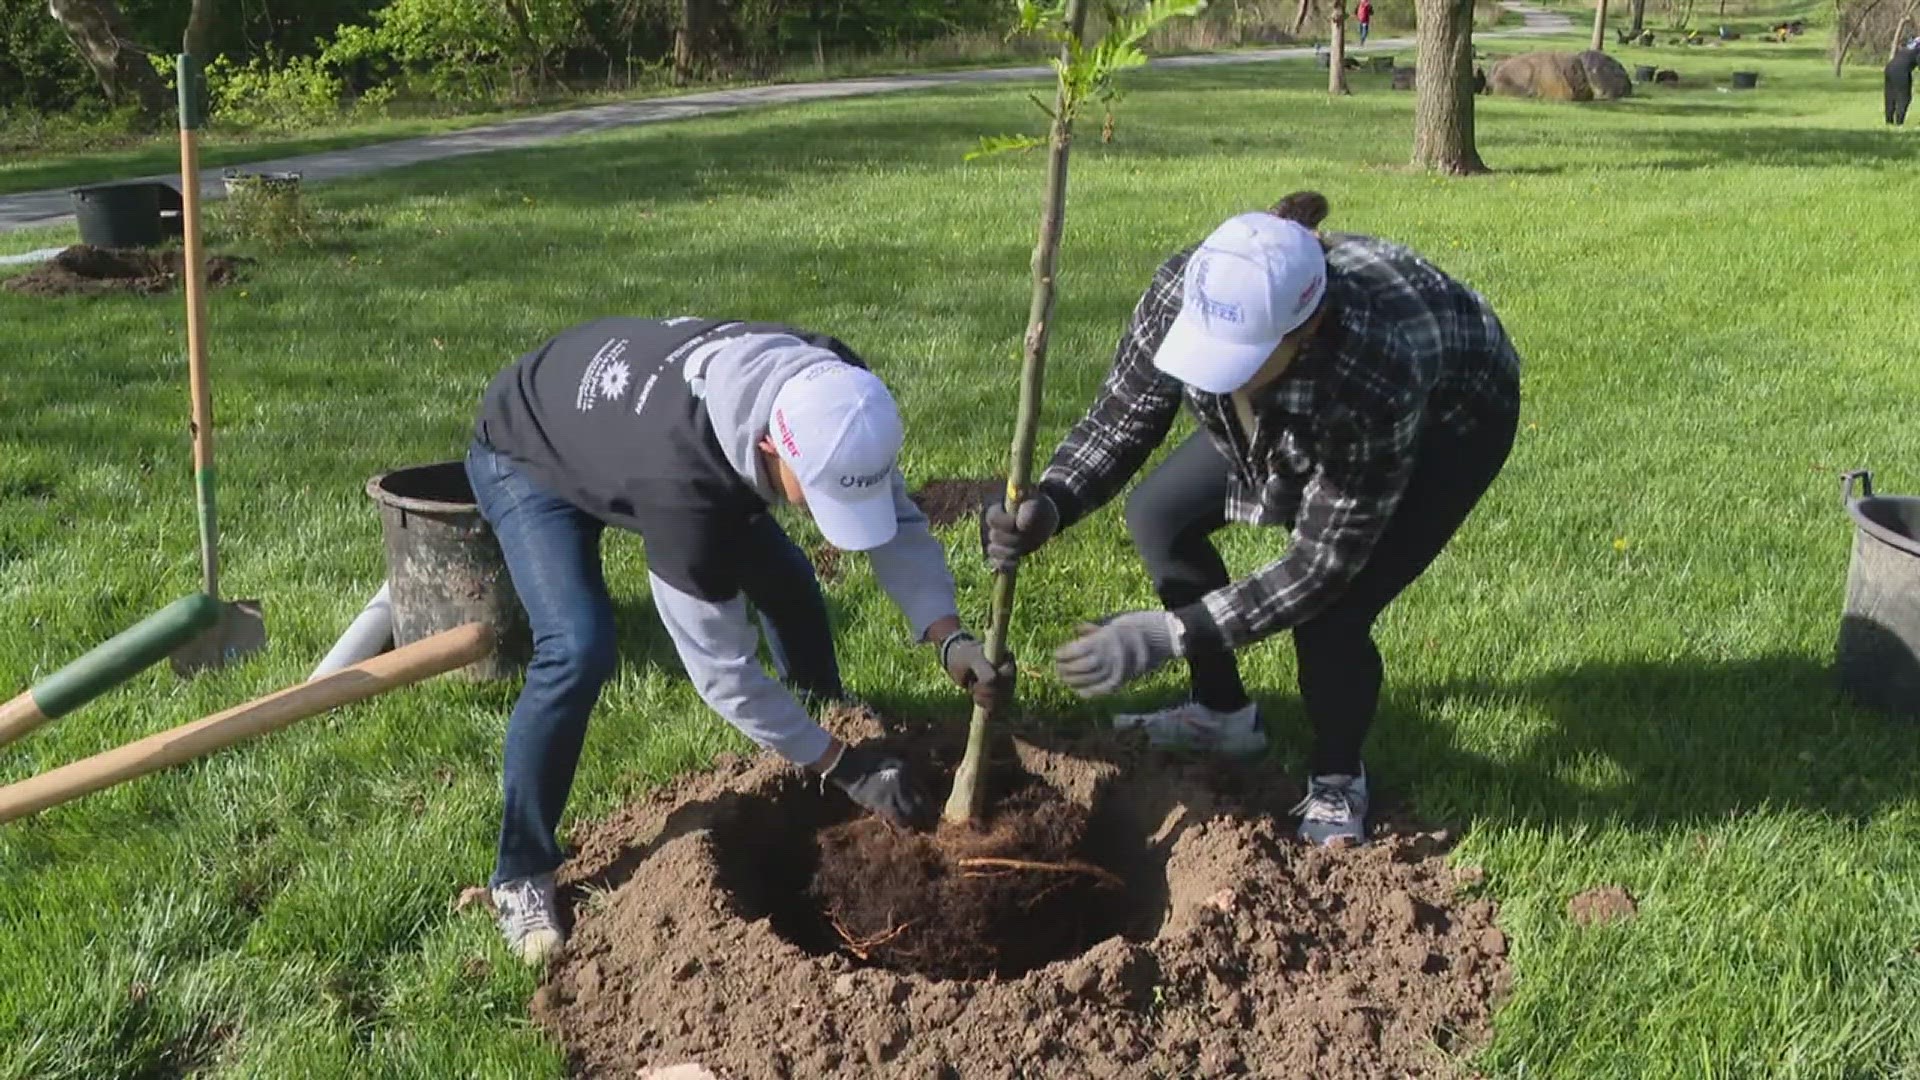 On this Earth Day players from the Indianapolis Colts are taking their number of touchdowns from last season and turning them into planted trees.